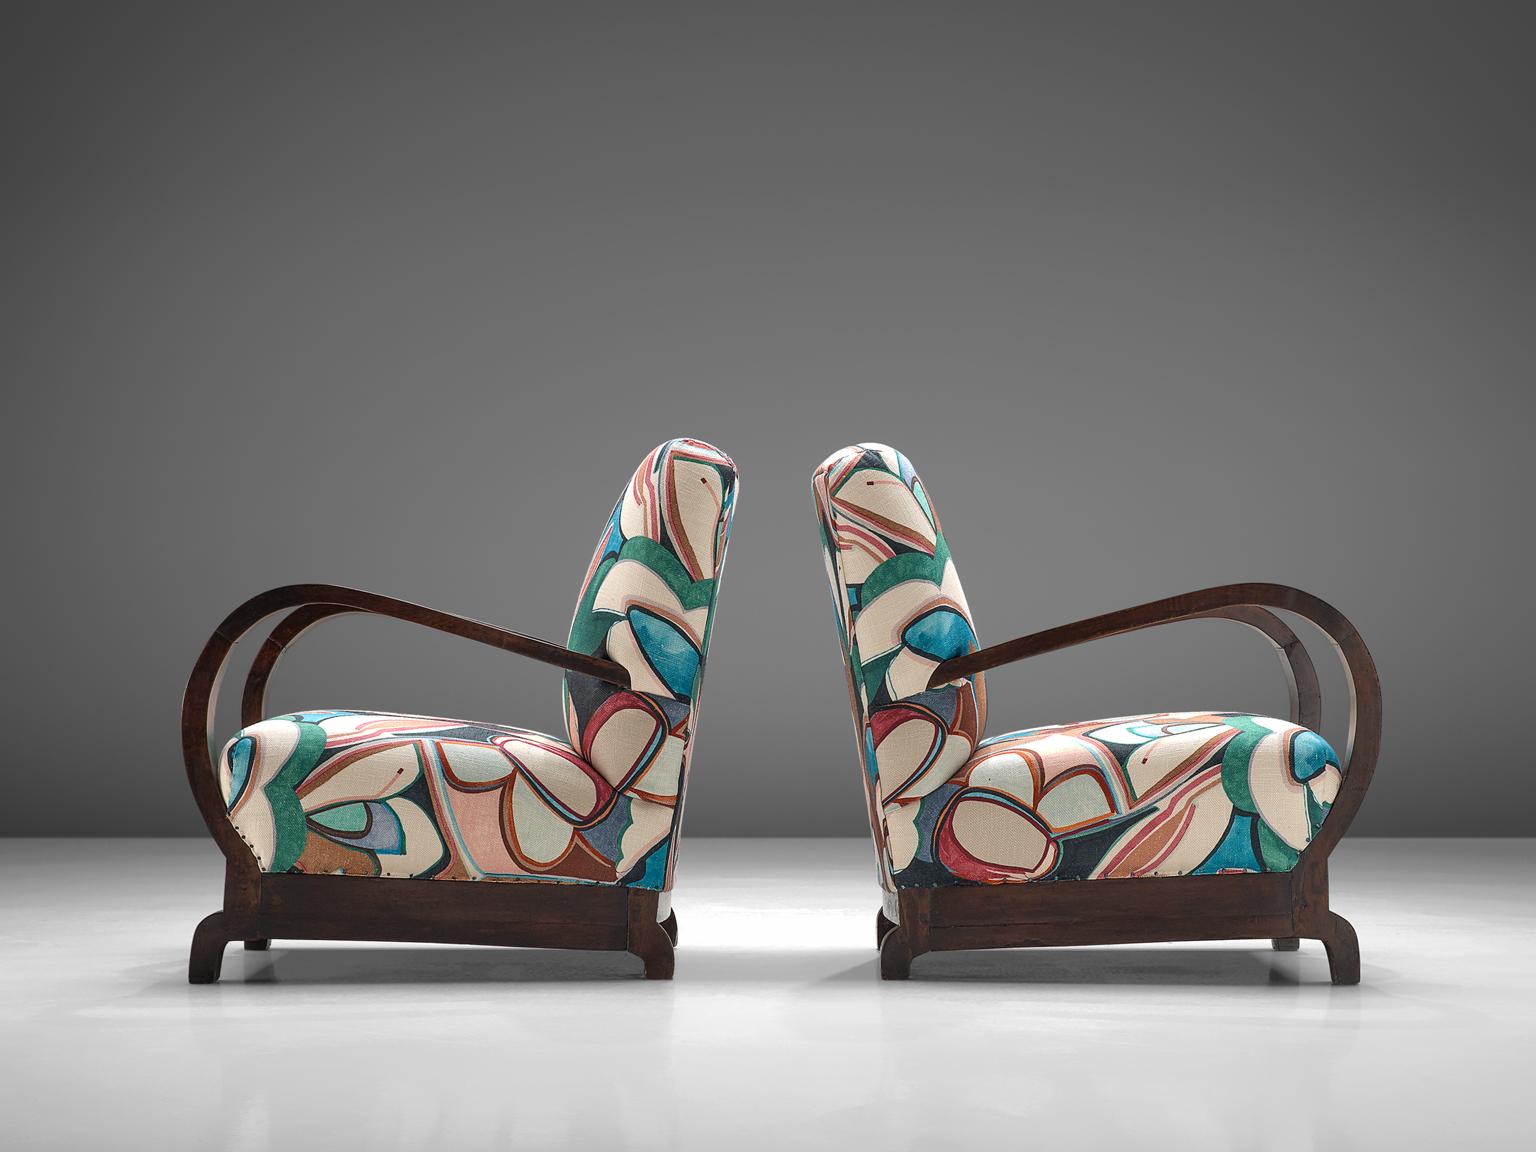 European Pair of Art Deco Chairs Reupholstered with a Floral Dedar Fabric